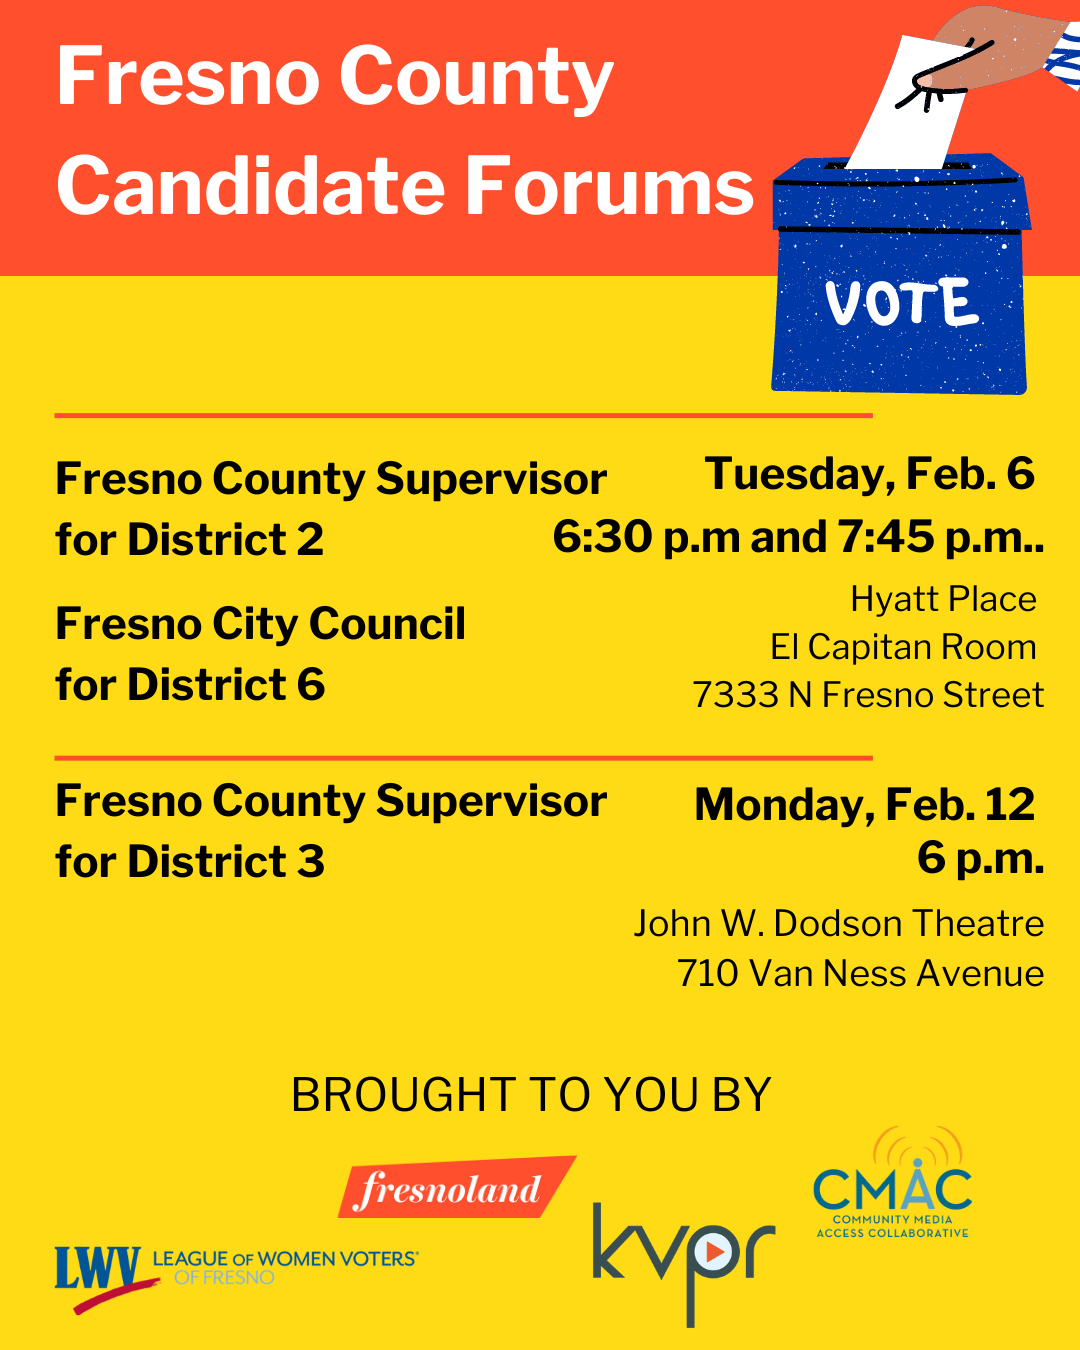 League joins Fresnoland, KVPR, CMAC to sponsor candidate forums for County supervisors,  districts  2 and 3